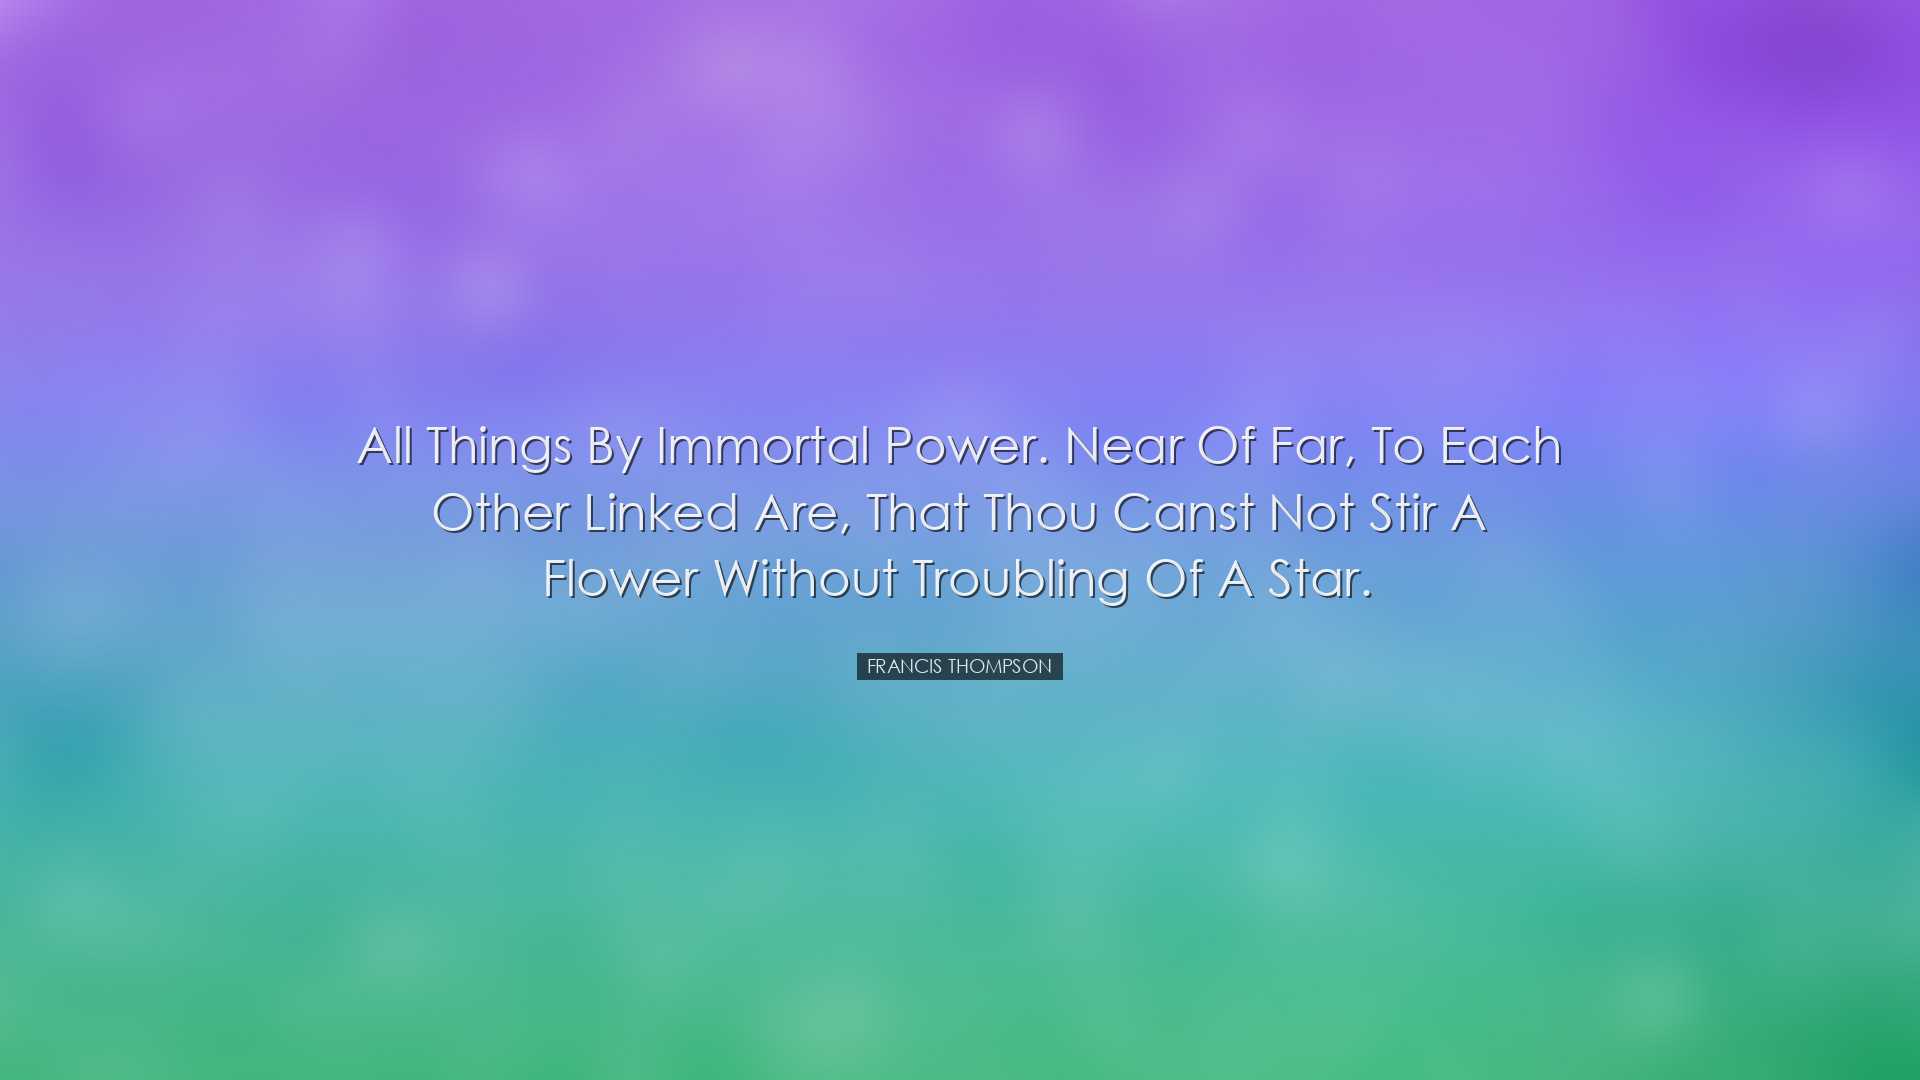 All things by immortal power. Near of far, to each other linked ar